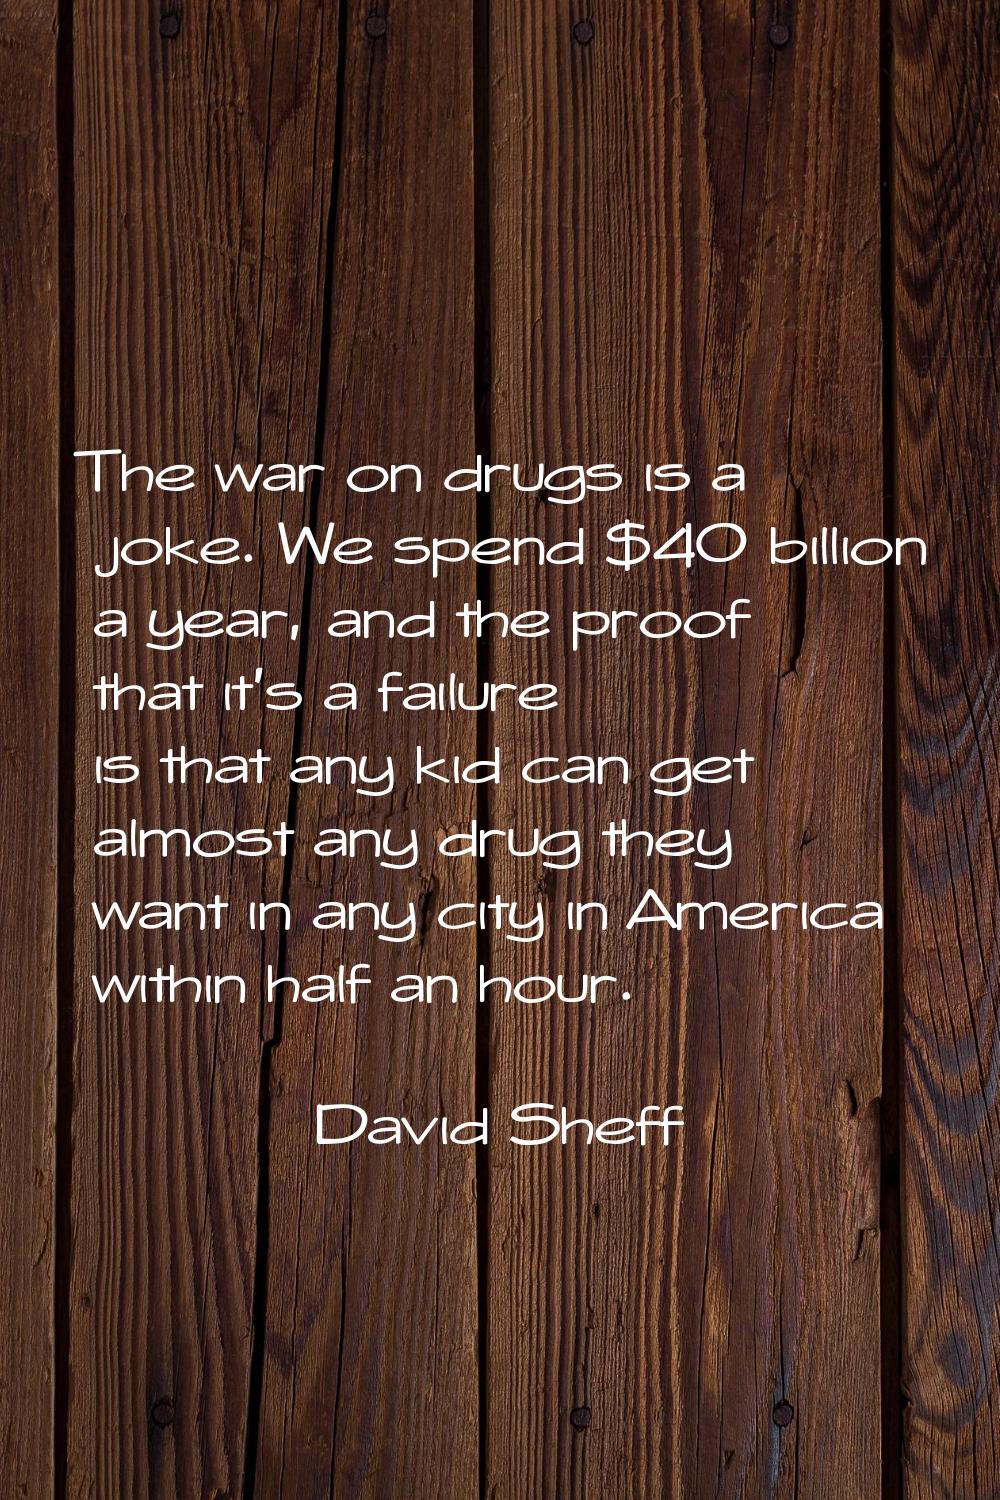 The war on drugs is a joke. We spend $40 billion a year, and the proof that it's a failure is that 